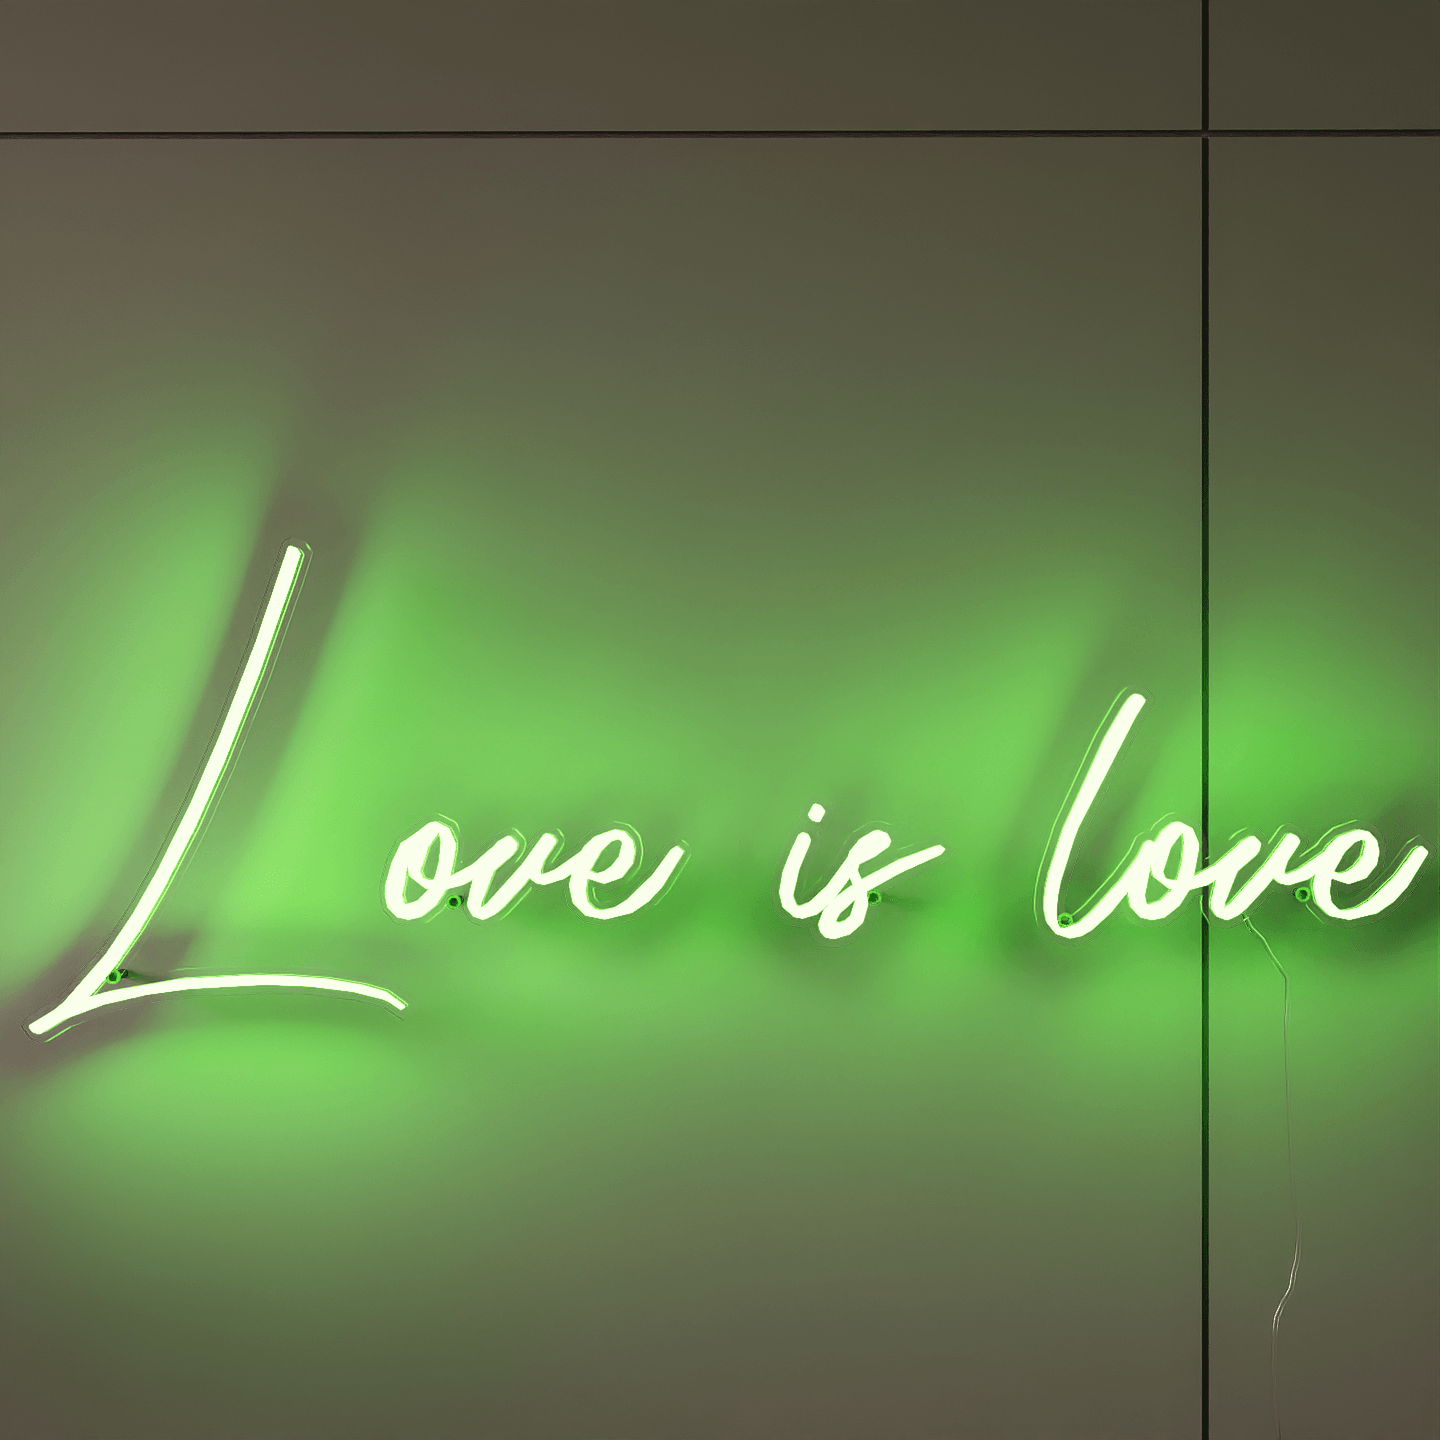 light-green-neon-lights-hanging-on-wall-for-display-love-is-love